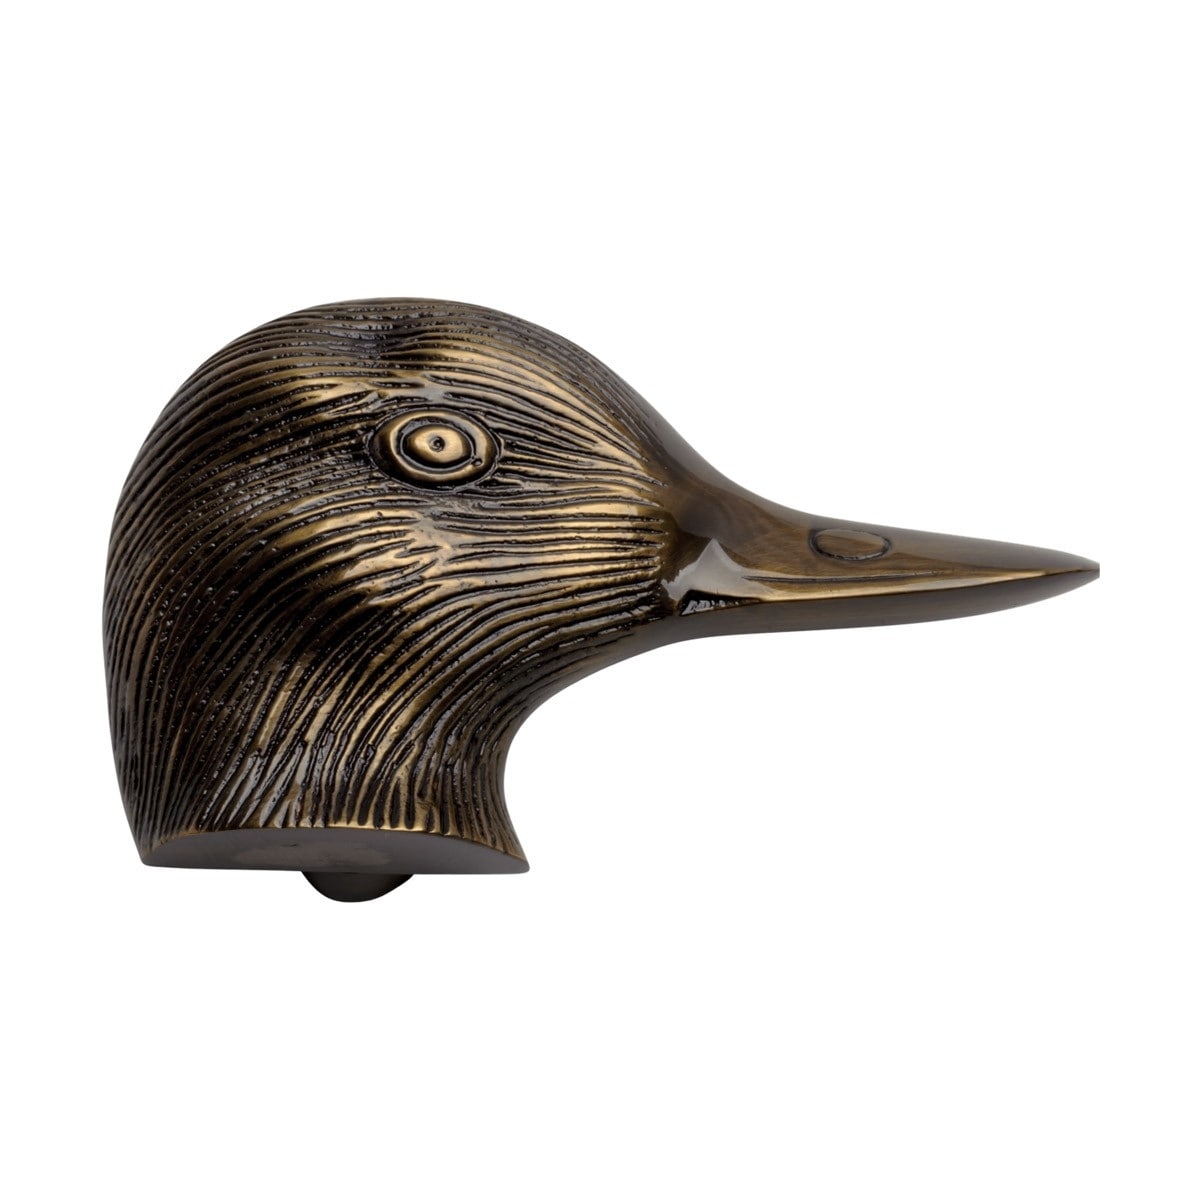 https://ak1.ostkcdn.com/images/products/is/images/direct/497bf01a7395fa352f5454e1d4c423df19eae8a0/Antique-Brass-Door-Knocker-Duck-Head-%7C-Renovator%27s-Supply.jpg